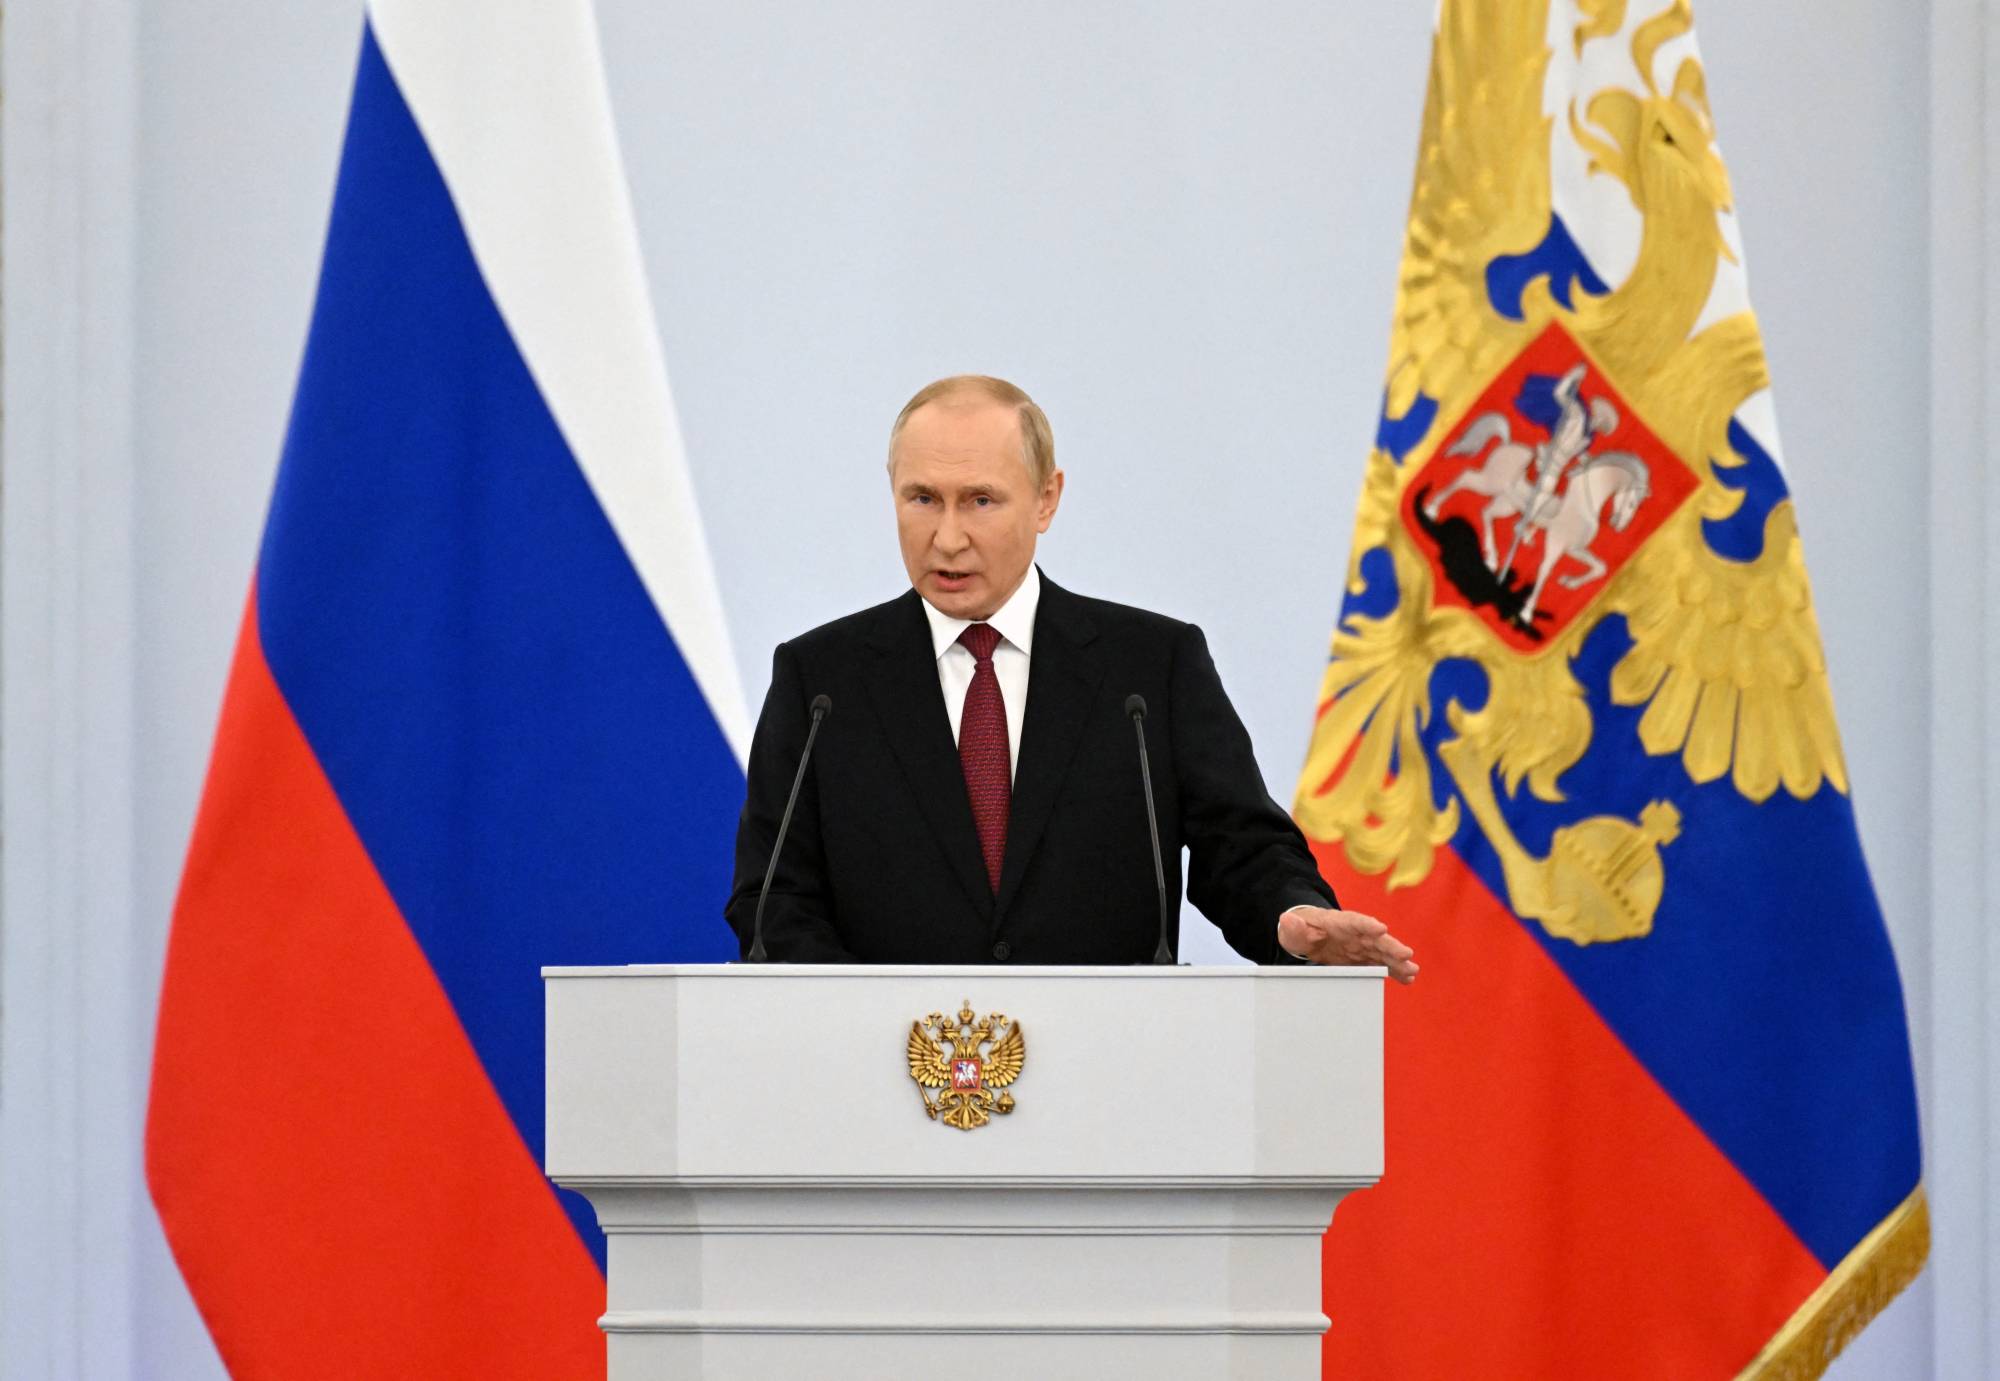 Russian President Vladimir Putin delivers a speech during a ceremony to declare the annexation of Ukranian territory, in Moscow on Friday.  | SPUTNIK / KREMLIN / VIA REUTERS